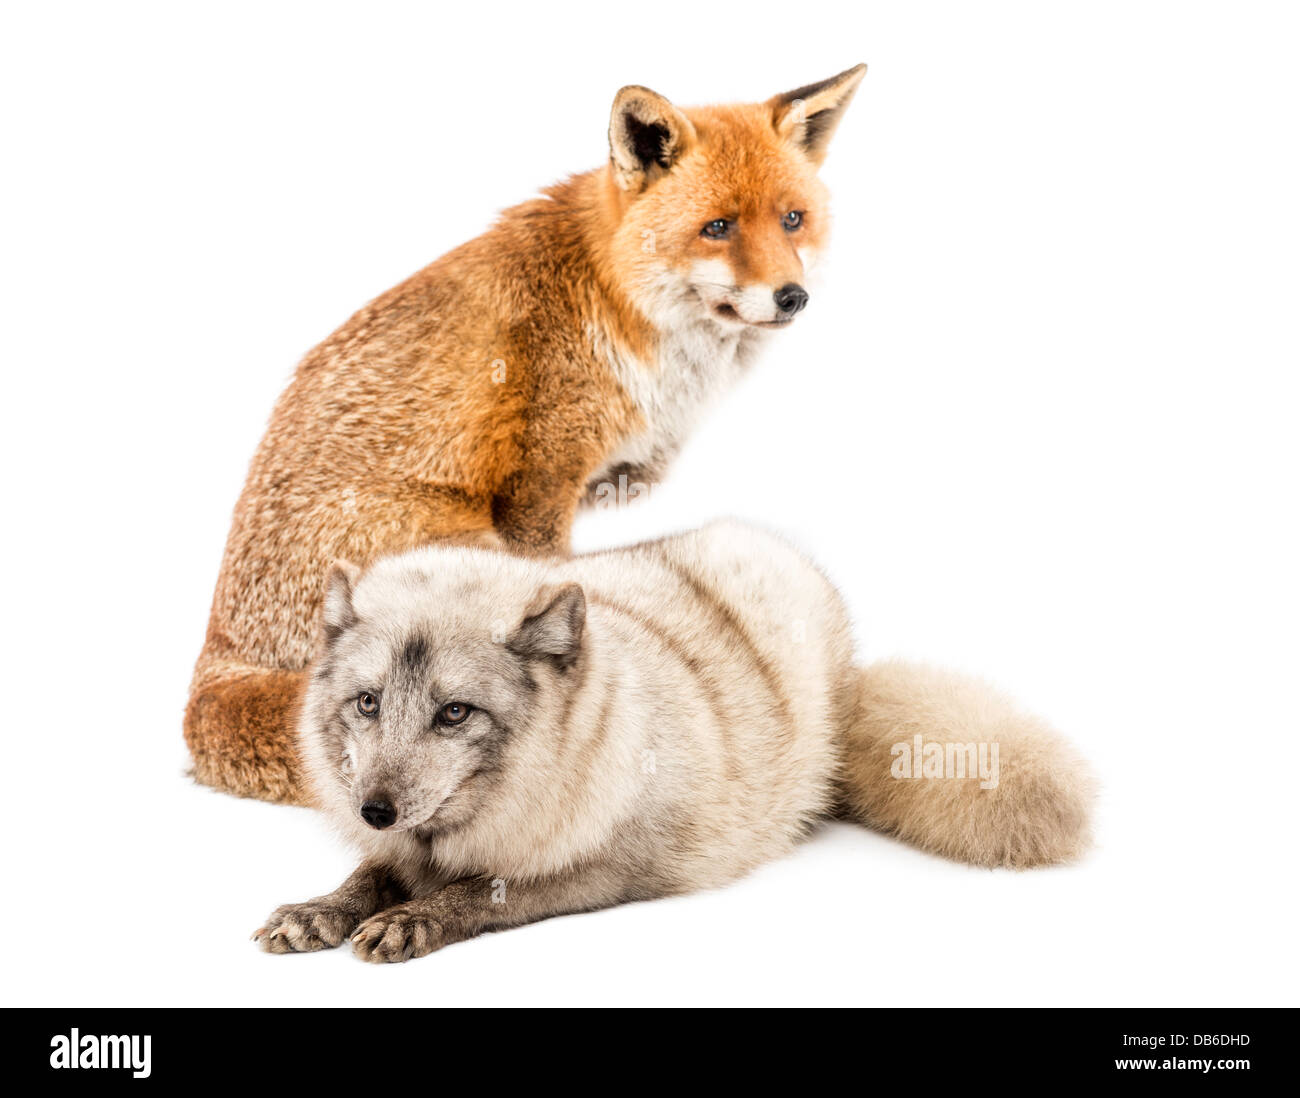 Red Fox, Vulpes vulpes, sitting next to Arctic Fox, Vulpes lagopus, lying  against white background Stock Photo - Alamy